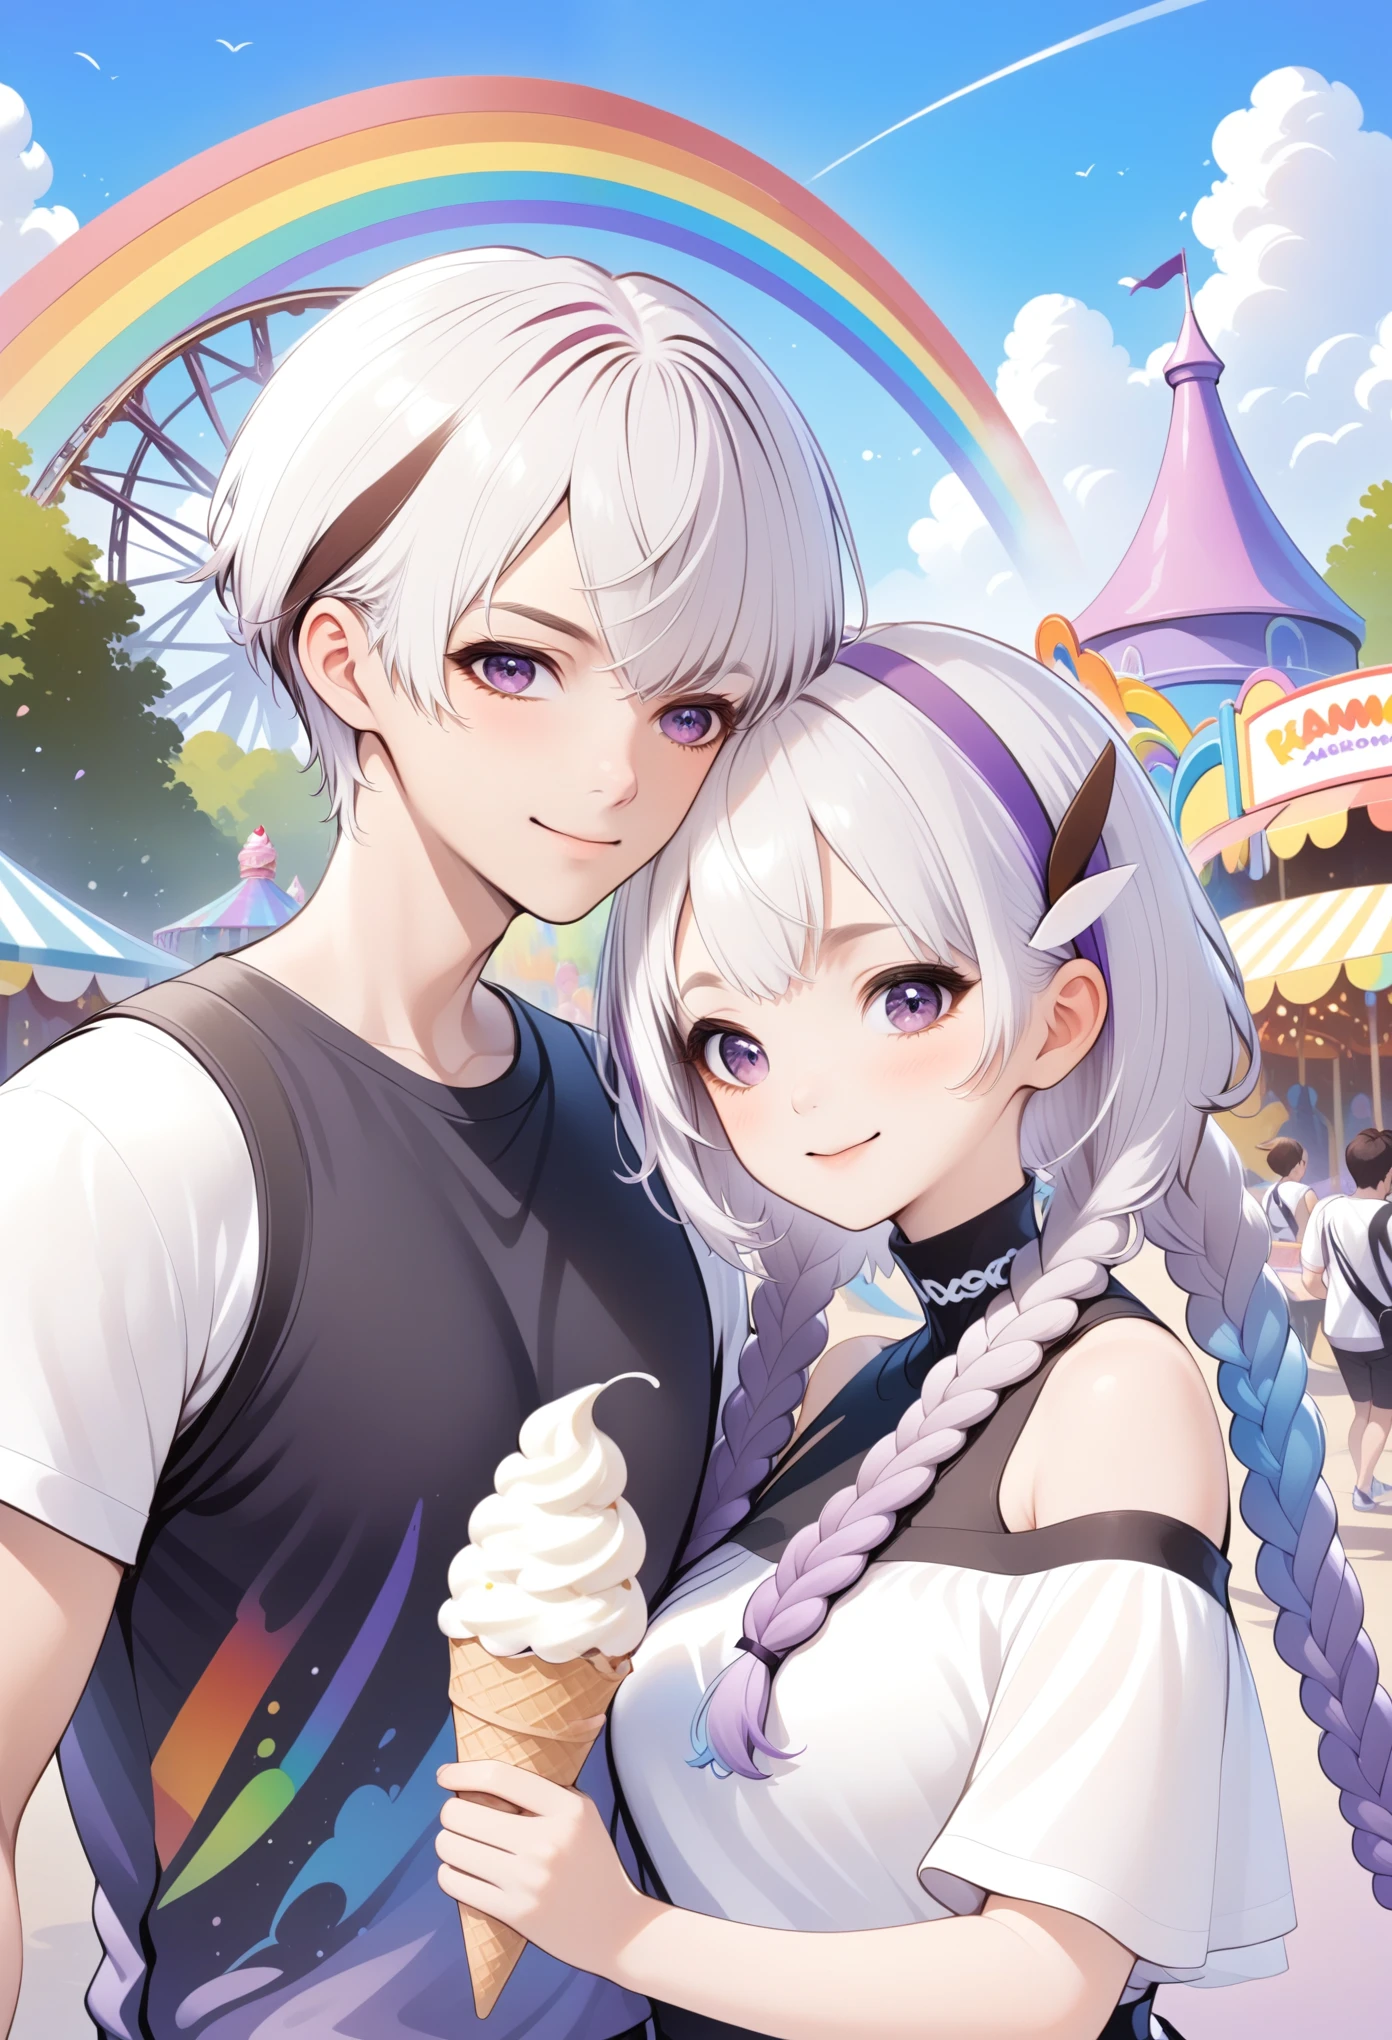 The right amount of art，Layered art：Happy couple，1 Boy-Short Hair。1 girl - white hair - purple double braids，High collar off-shoulder short sleeves，Ice cream cones，amusement park，Rainbow Colors